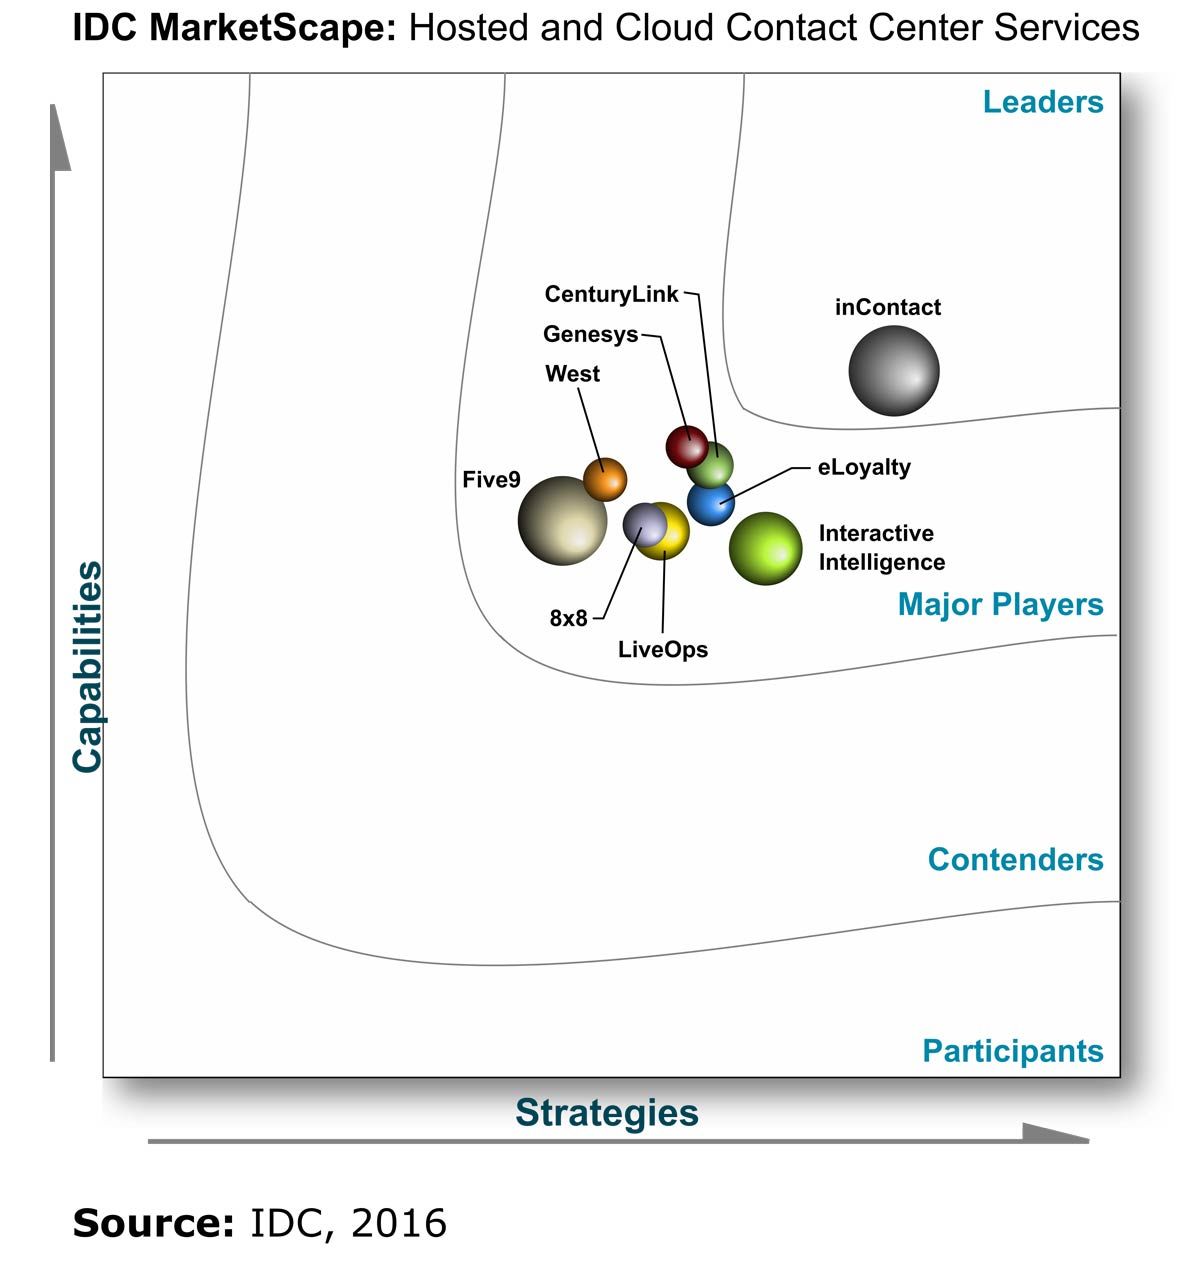 idc marketscape for cloud contact centers